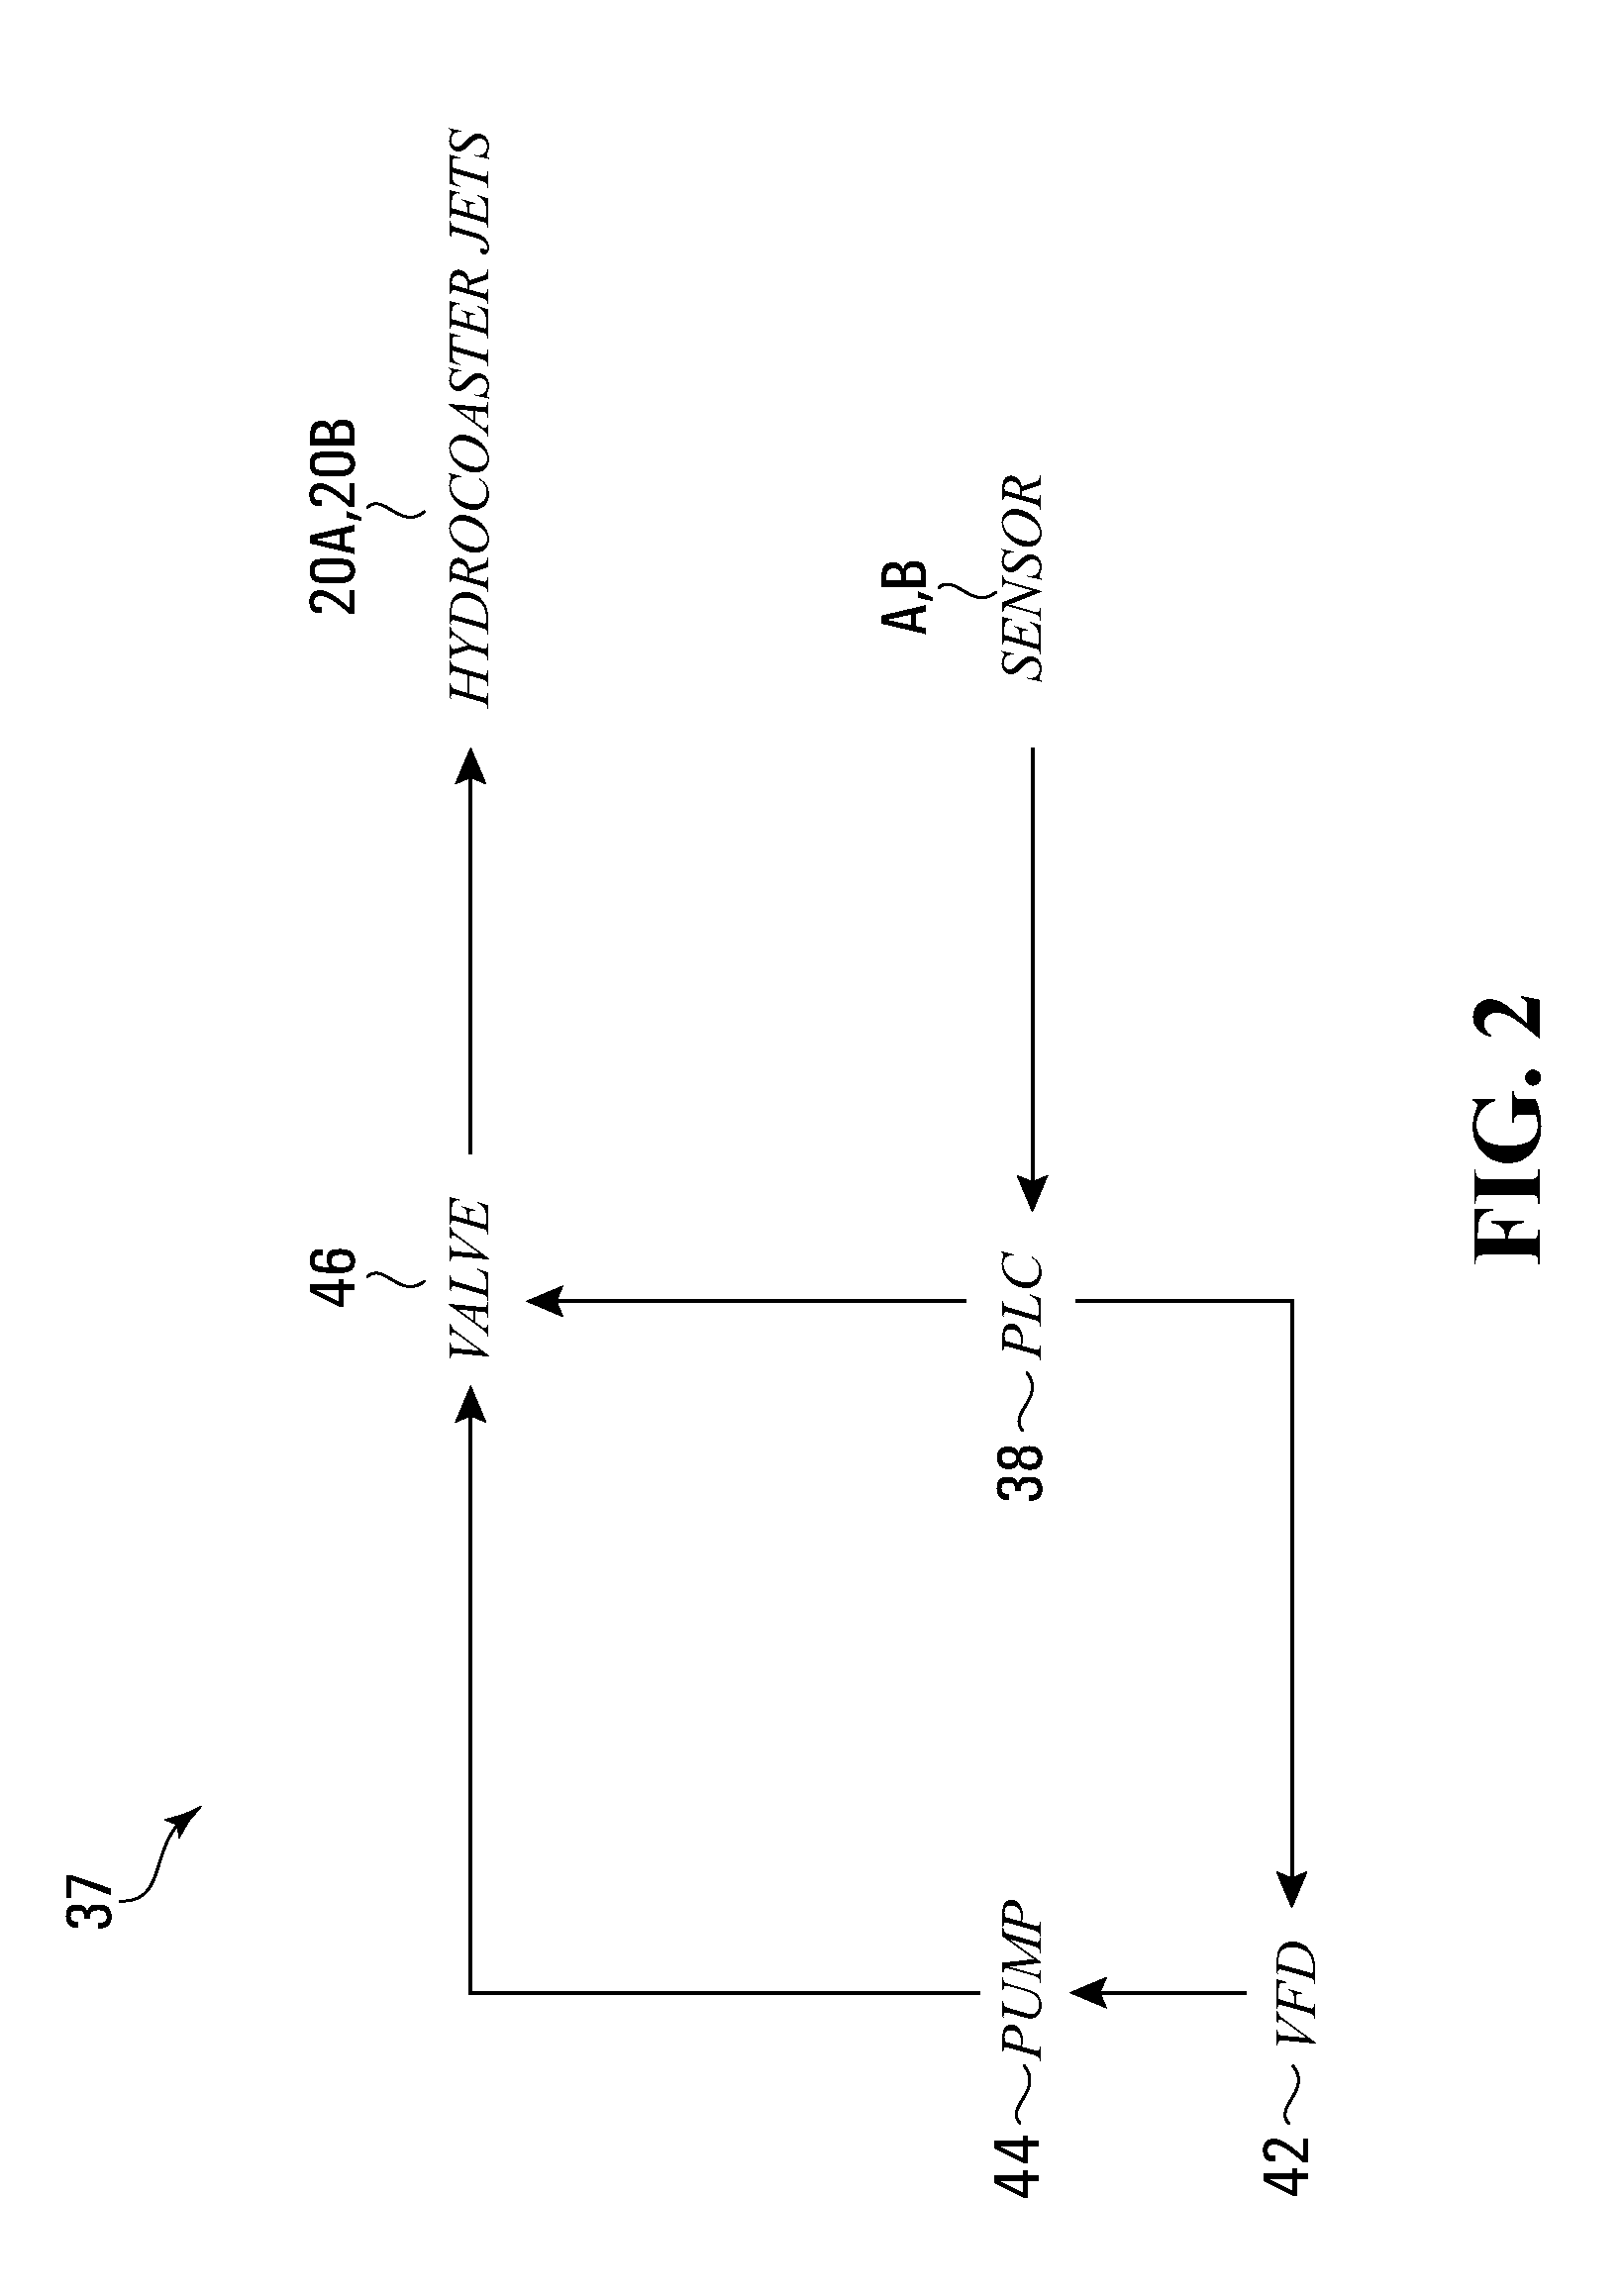 Amusement ride vehicle and vehicle control system